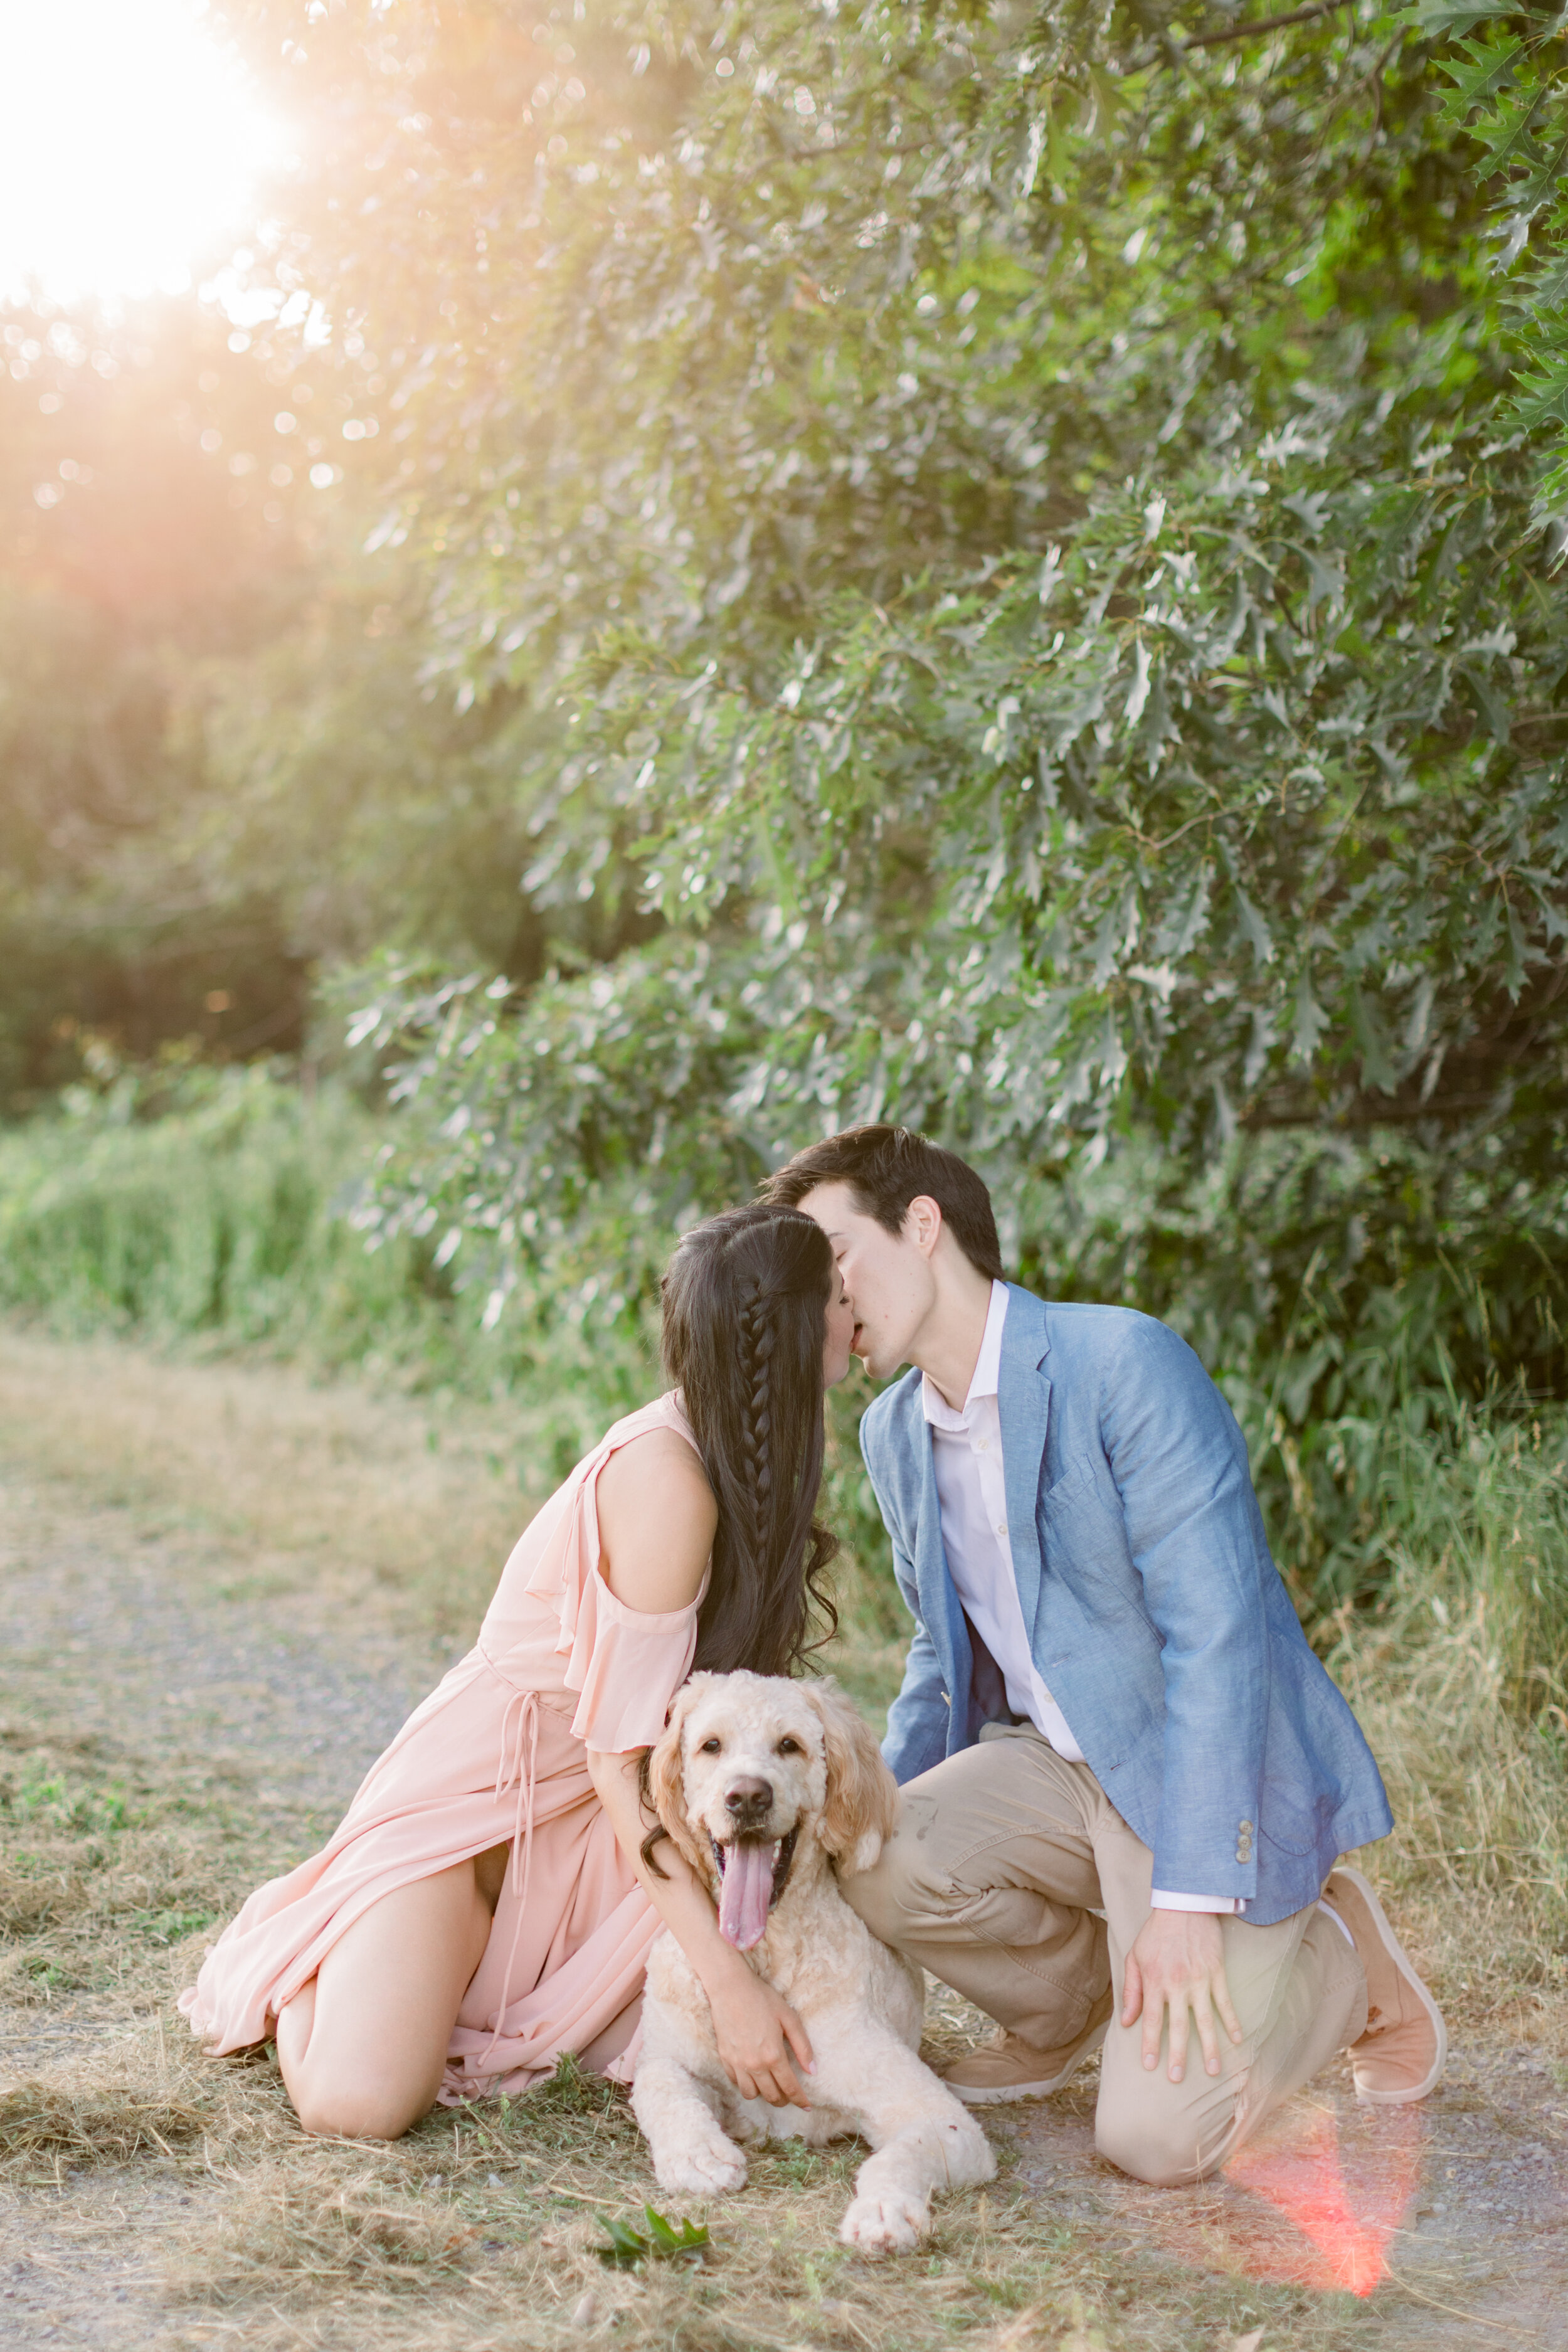  Engagement photo sessions with couple wearing pink and blue and posing with their dog by Chelsea Mason Photography in Ottawa, ON. couple outfit inspo for summer engagements dog poses for engagements doing engagements with your dog photographing dogs